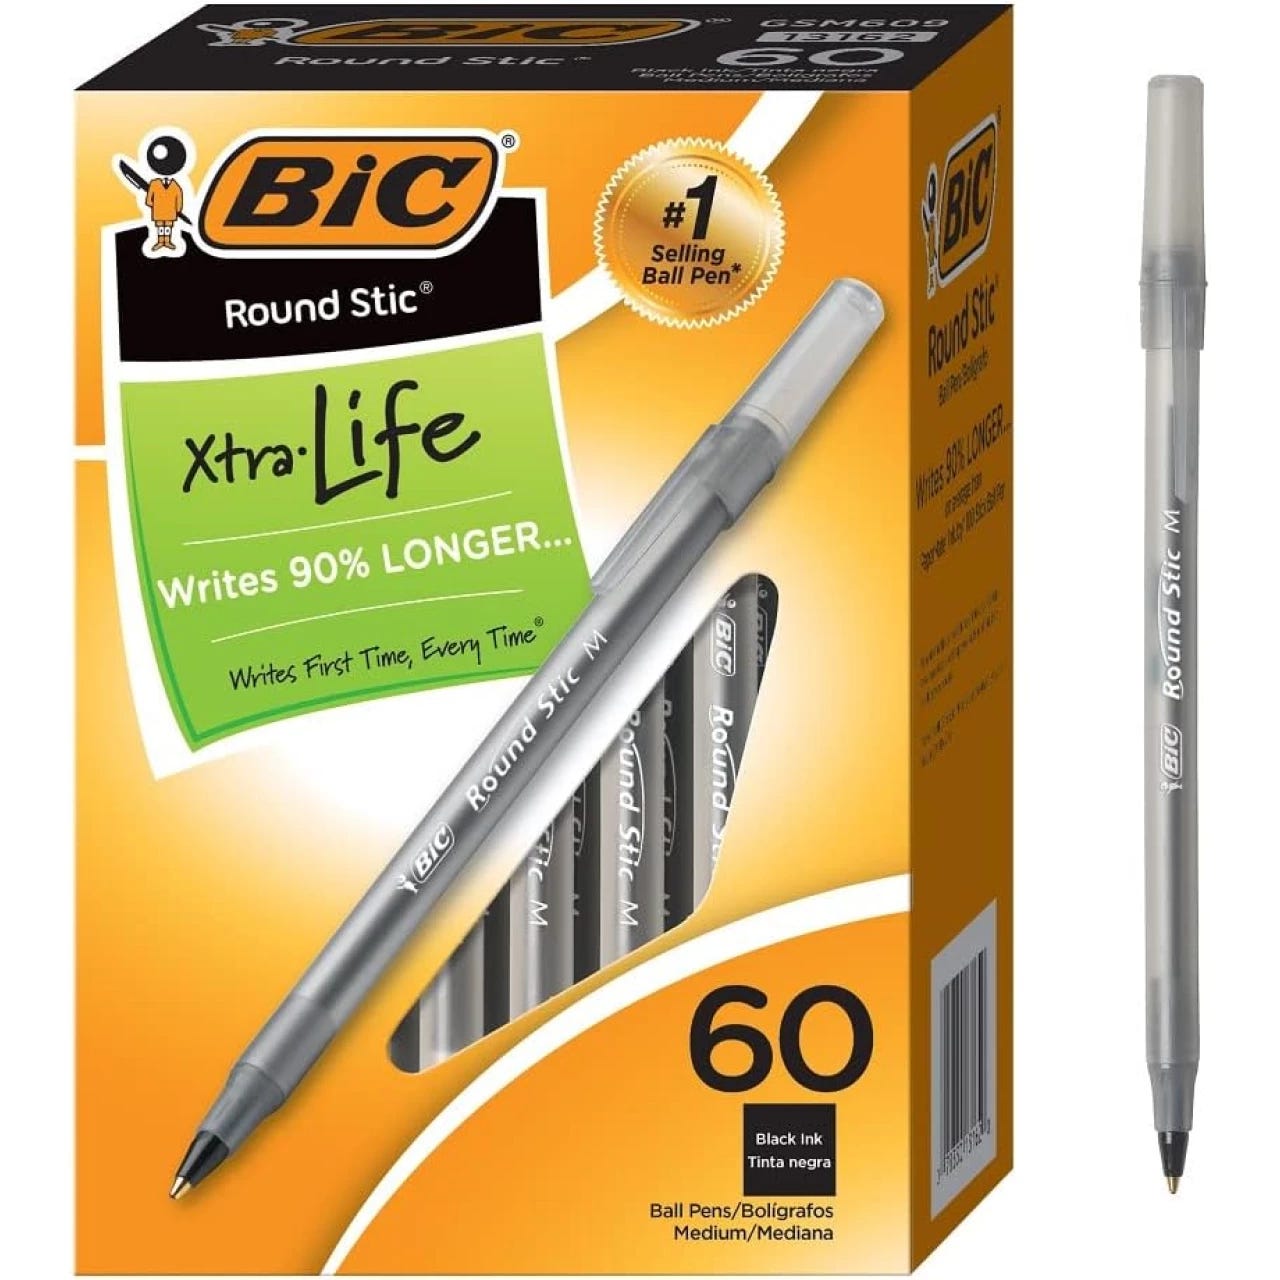 iBayam Journal Planner Pens Colored Pens Fine Point Markers Fine Tip Drawing Pen